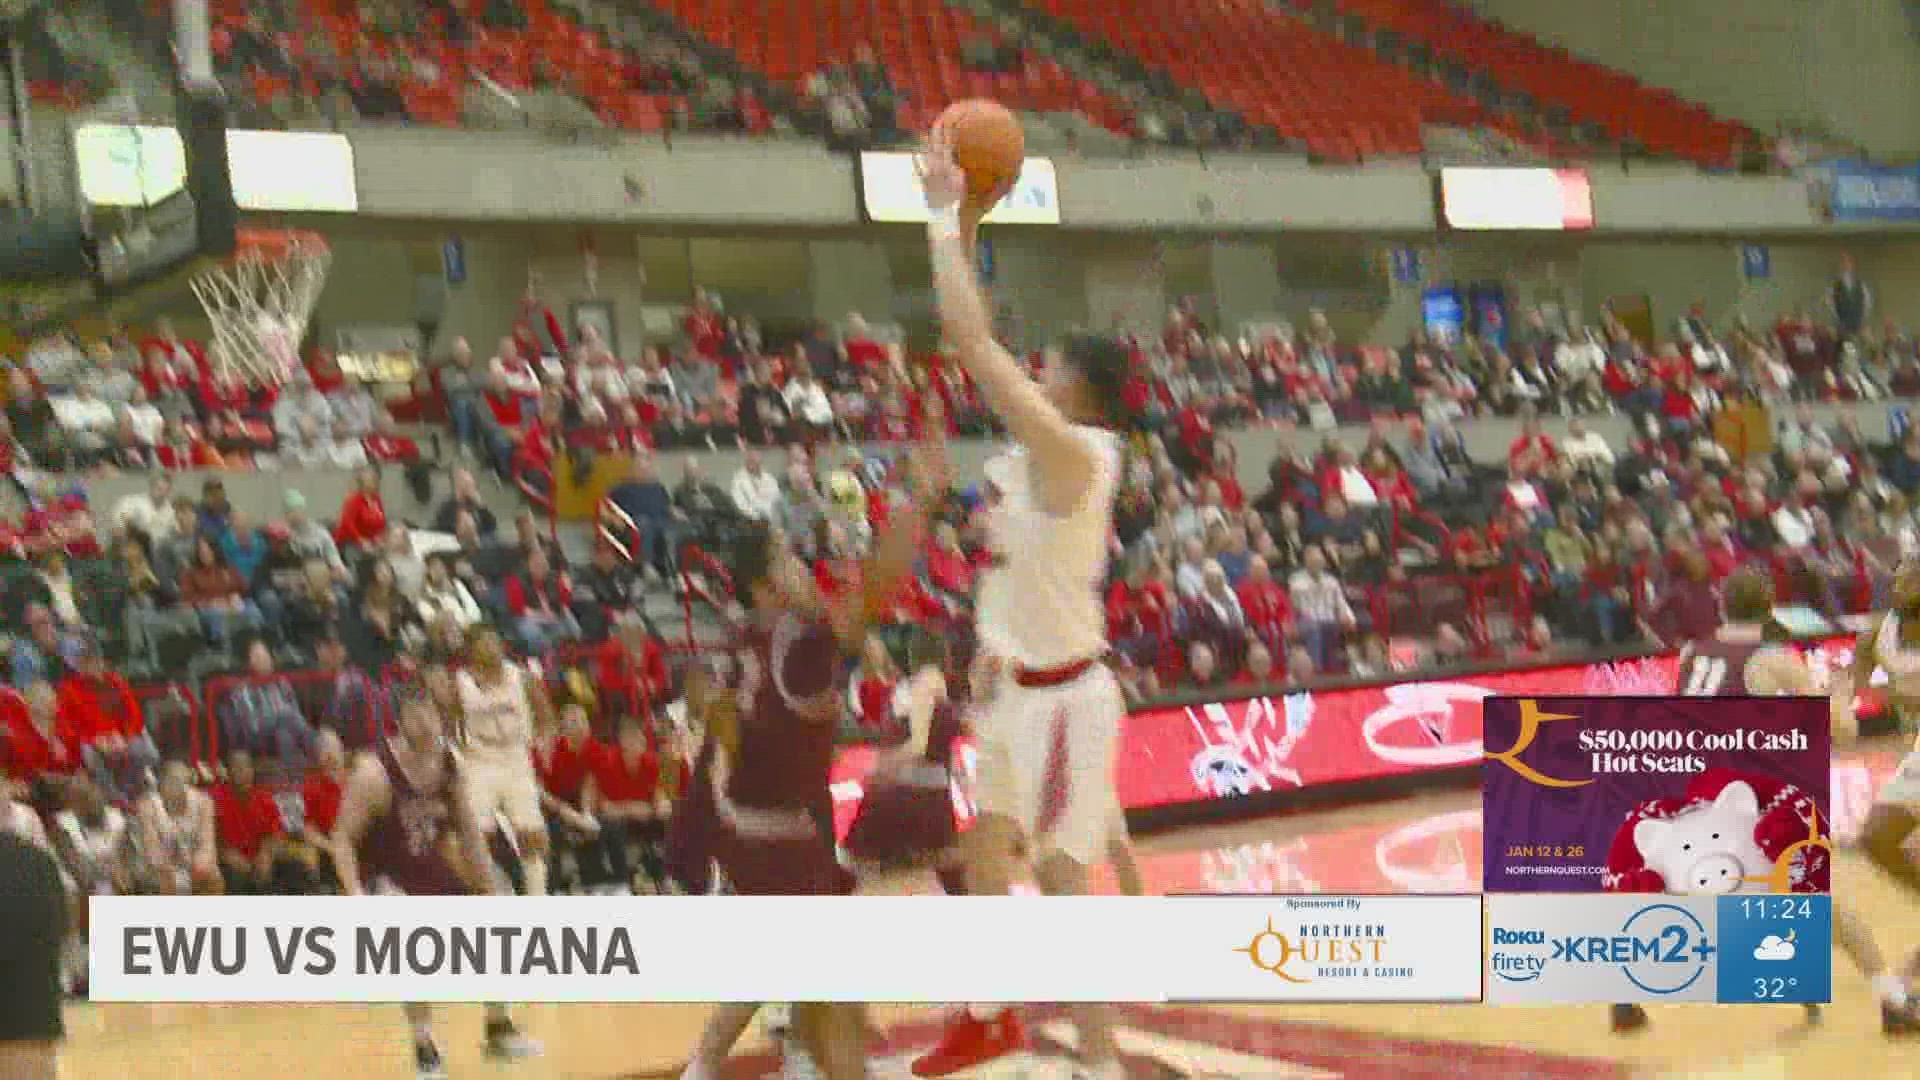 Eastern Washington men's basketball topped Montana 64-57 to complete a two-game season sweep of the Grizzlies.